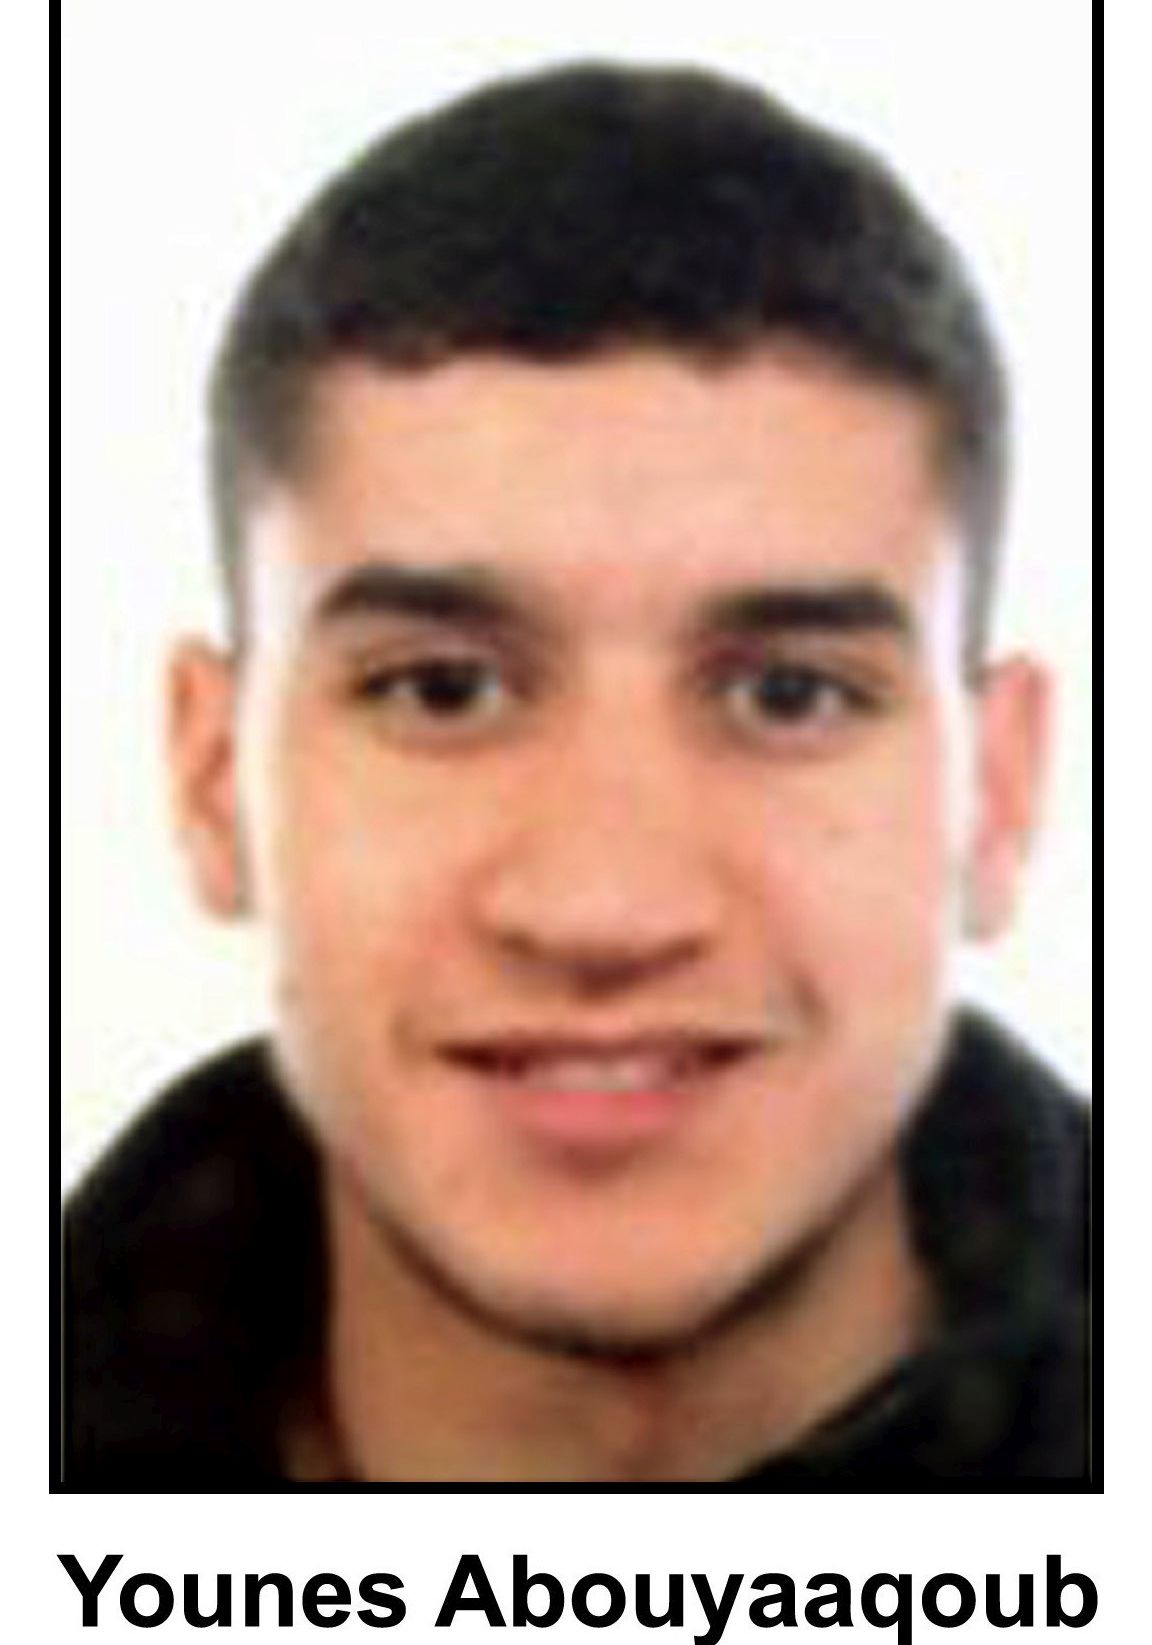 epa06150158 A handout photo made available by Spanish Police shows Younes Abauyaaqoub, alleged terrorist suspect wanted in connection with the 17 August  terrorist attacks in the Catalonian cities of Barcelona and Cambrils. According to media reports, at least 14 people were killed and some 130 others injured after cars crashed into pedestrians on the Las Ramblas boulevard in Barcelona and on a promenade in the coastal city of Cambrils. Spanish police have stated that the attacks in Barcelona and in Cambrils were linked. The so-called 'Islamic State' (IS) has claimed responsibility for the attack in Barcelona.  EPA/Spanish Police / HANDOUT  HANDOUT EDITORIAL USE ONLY/NO SALES